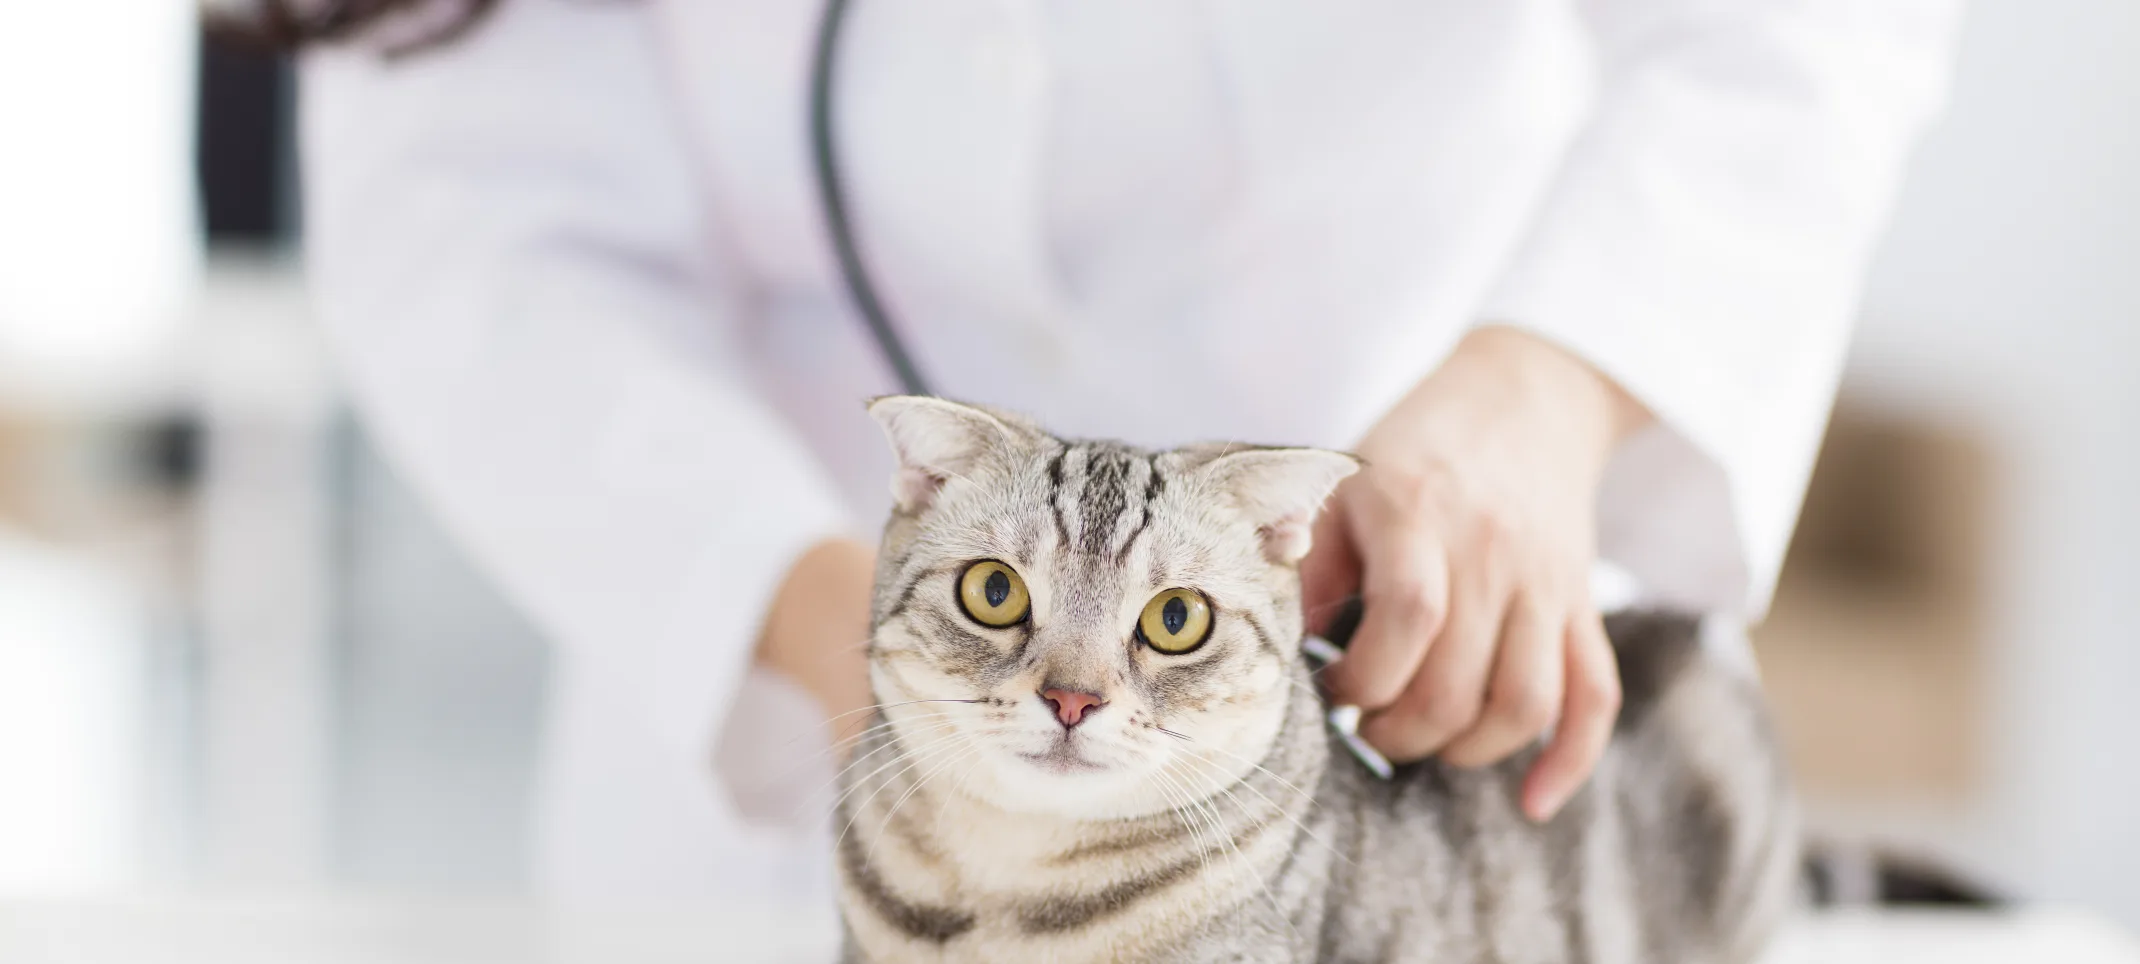 Grey tabby cat getting checked up (heartbeat)  on a doctor's table by a Veterinarian.  